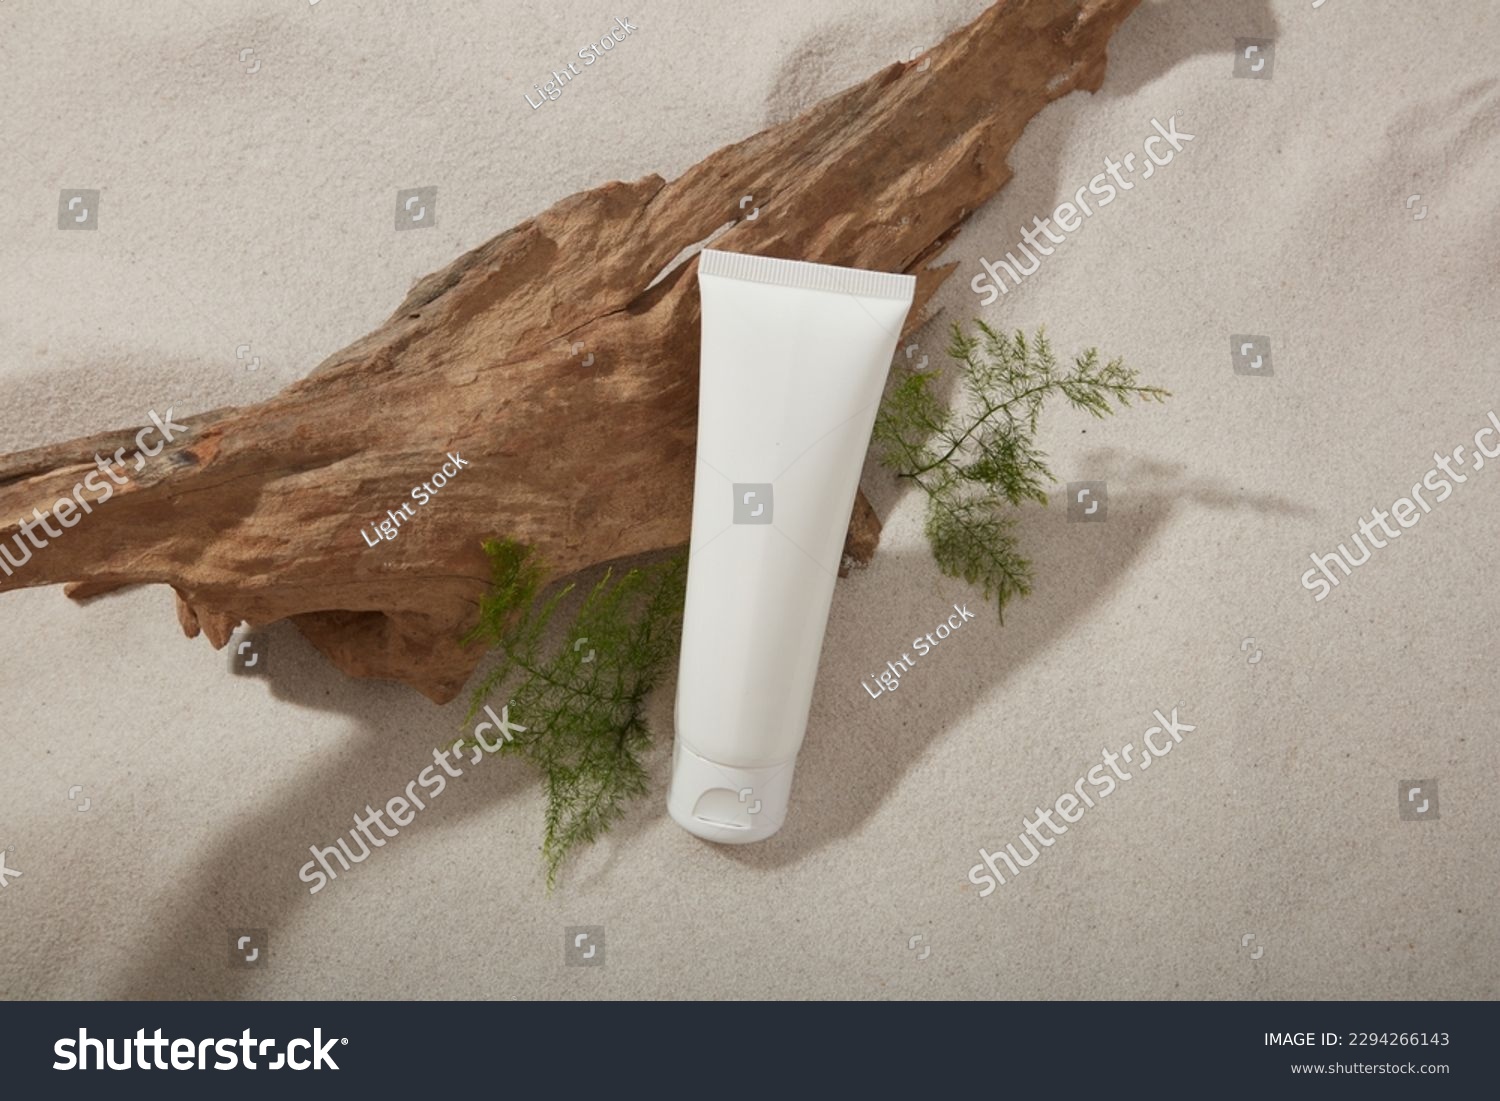 Mockup scene for cosmetic with white plastic bottle unbranded on sand texture background with dried twig and green leaves. Natural concept #2294266143